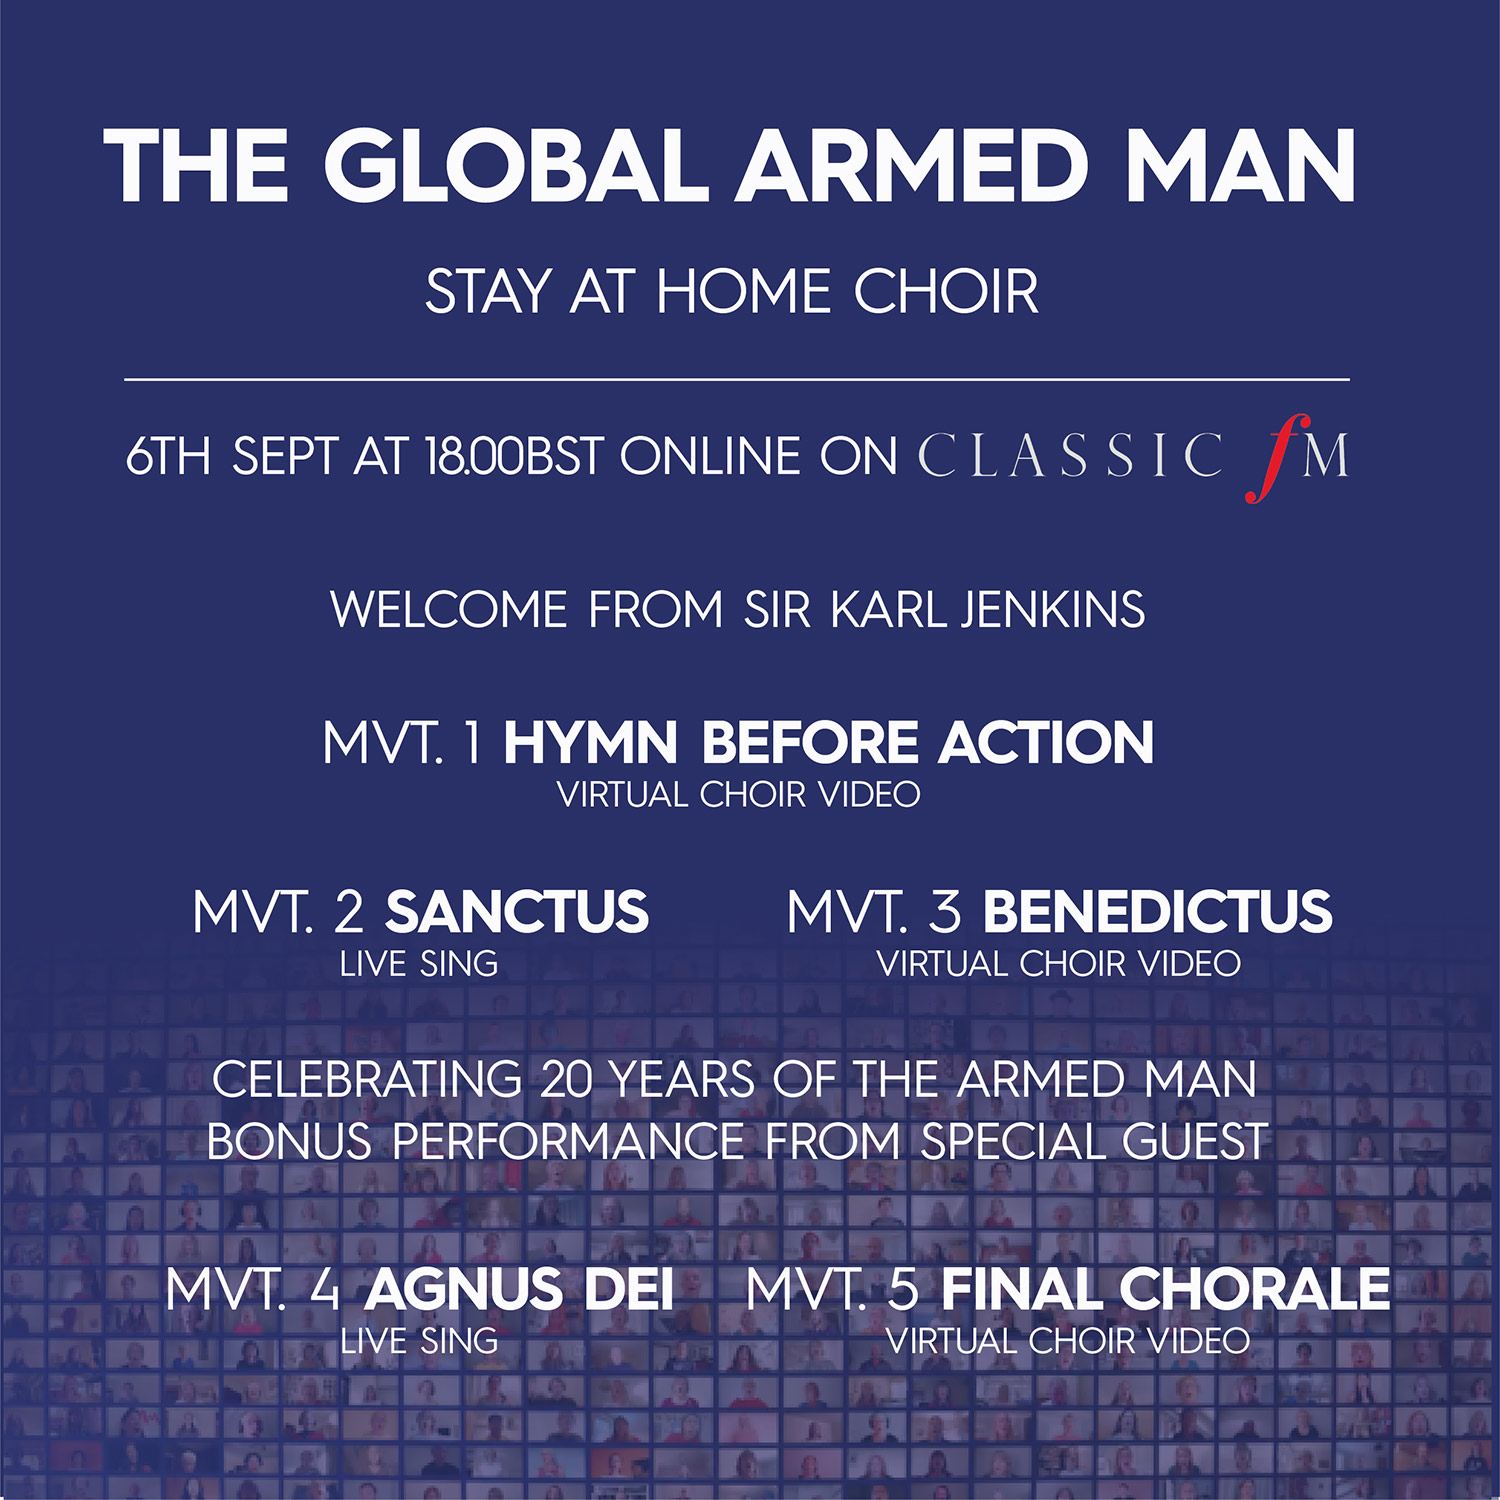 The Global Armed Man Live Event with the Stay At Home Choir